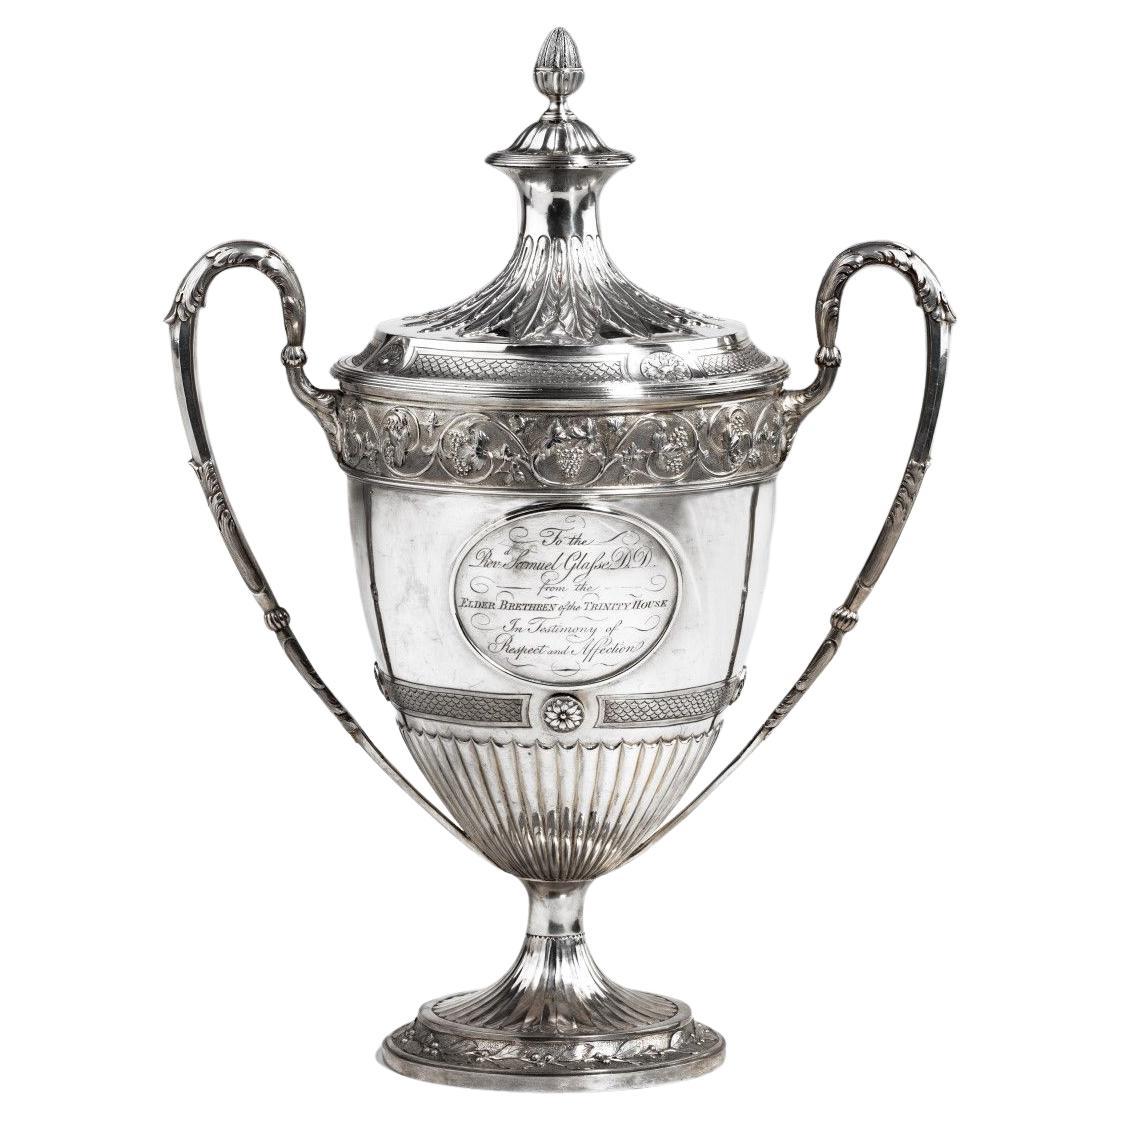 Trinity House silver presentation cup and cover 1795 For Sale